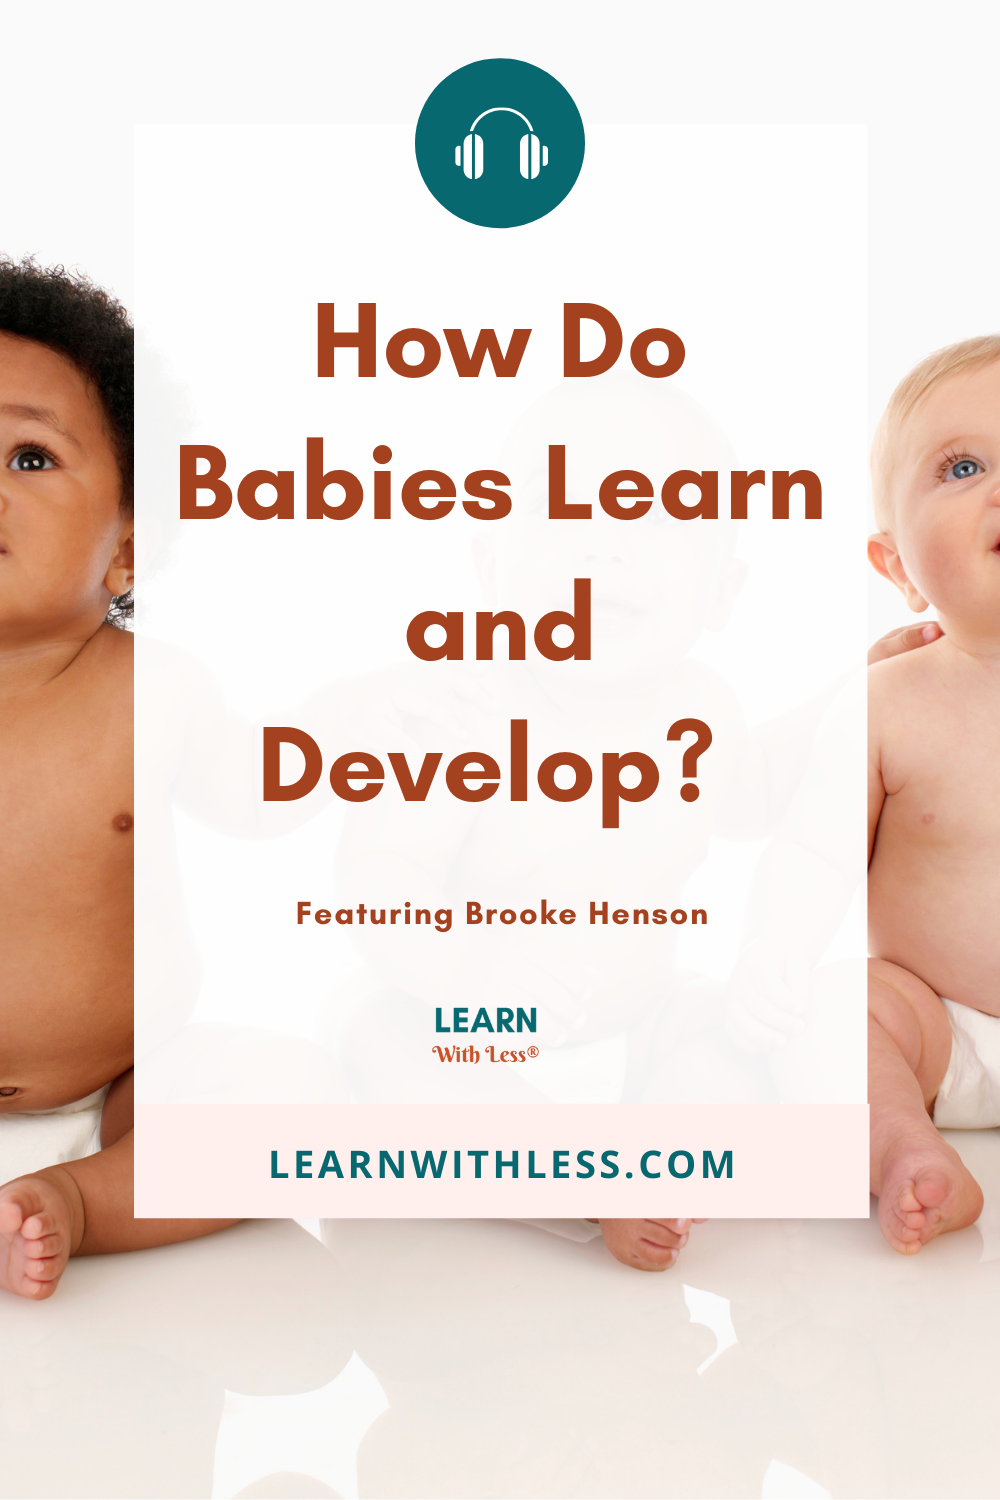 How Babies Learn And Develop - Resources for Parents and Caregivers